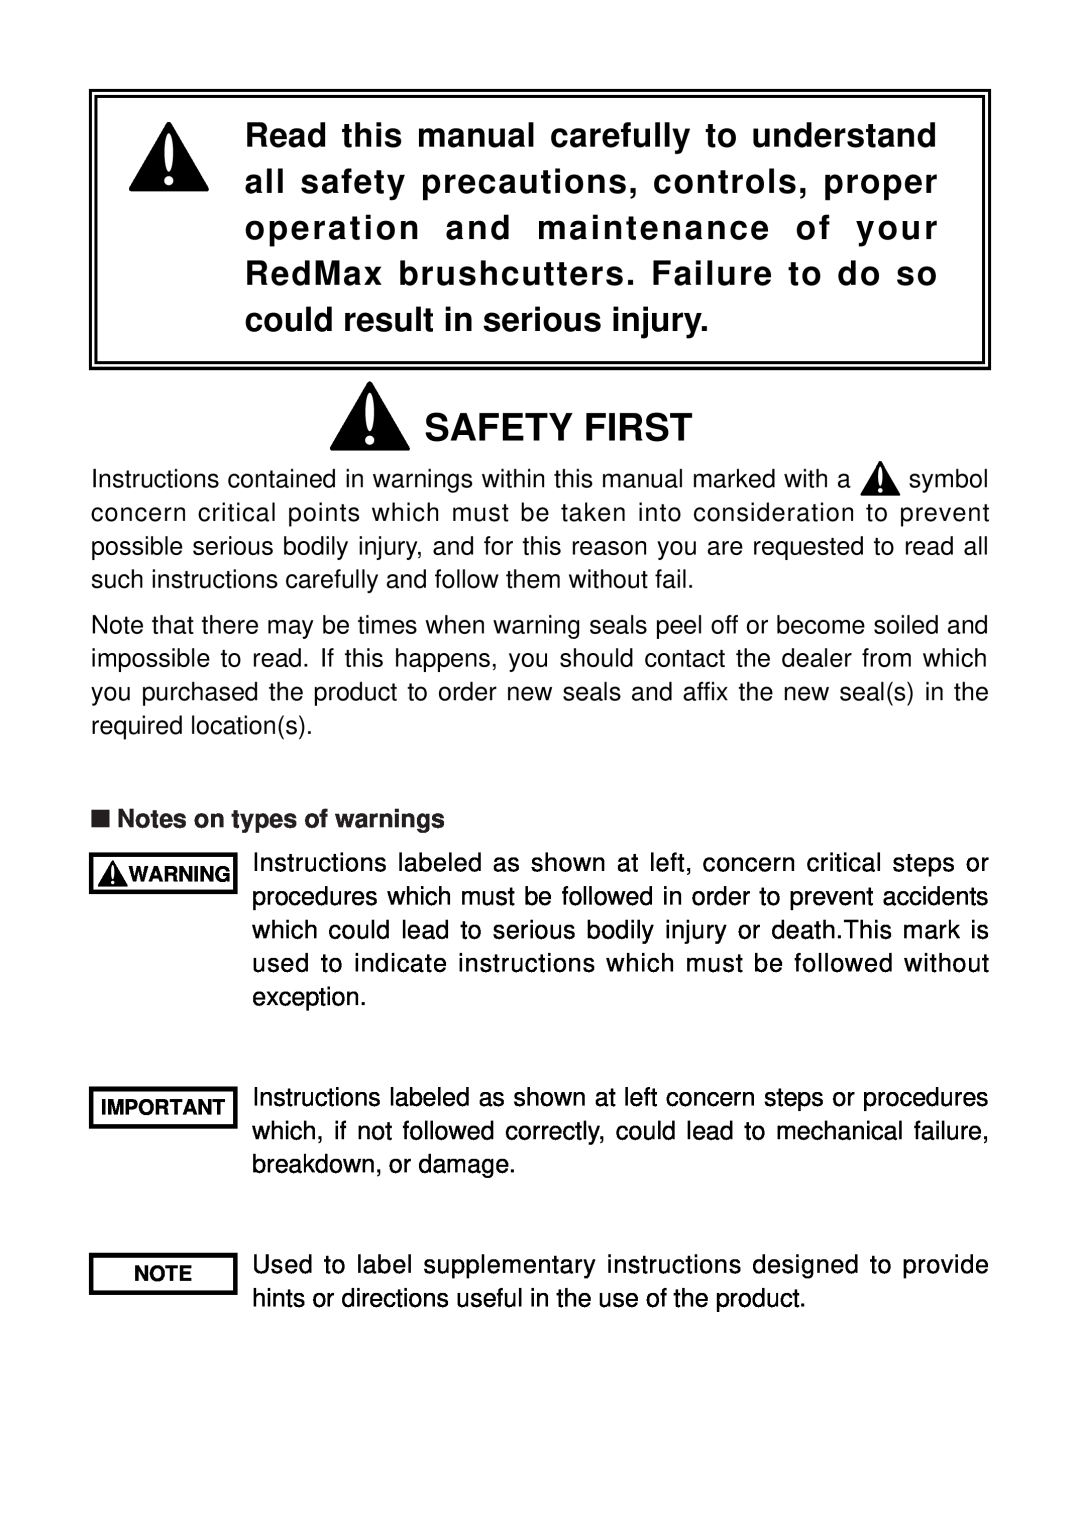 RedMax BC3400DL, BC4400DW, BC2300DL, BC2600DL manual Safety First, Notes on types of warnings 